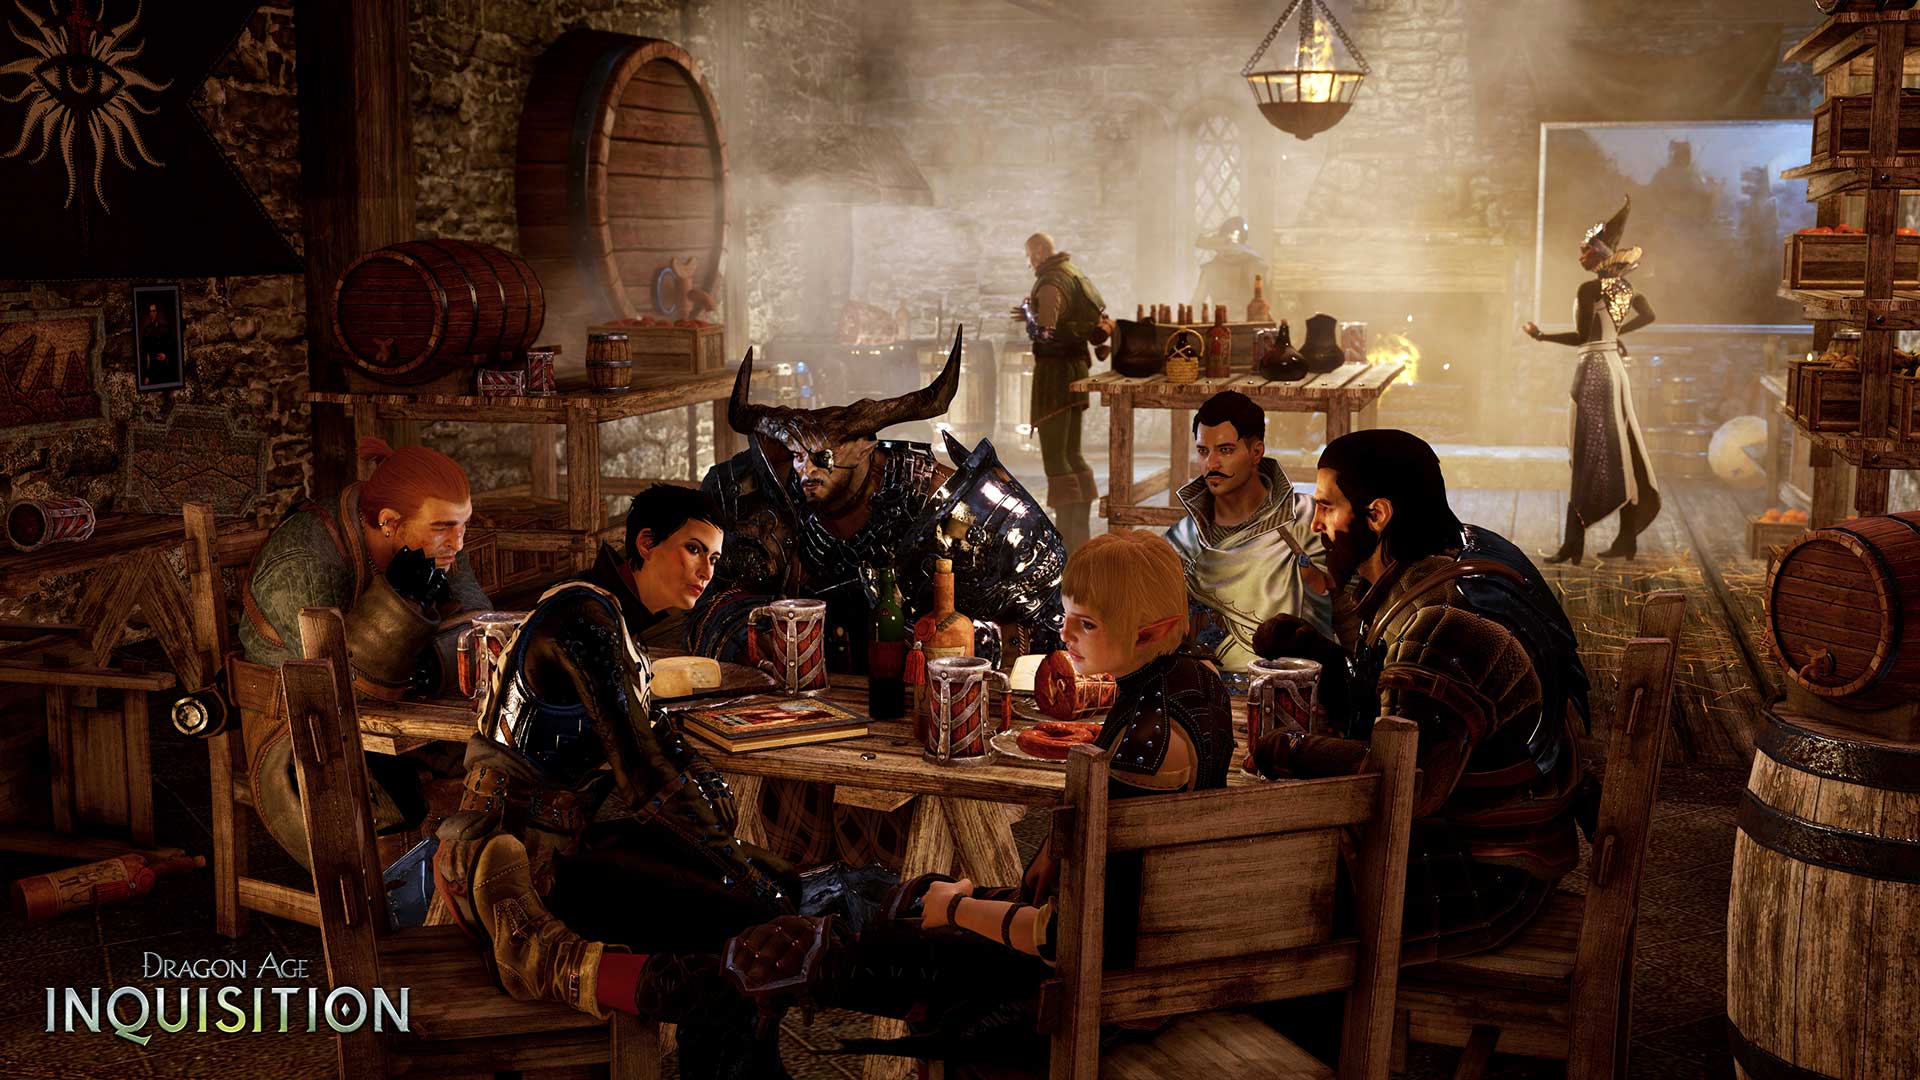 Traipsing Through the Countryside Punching Dragons: How Banter and Music Work in Inquisition